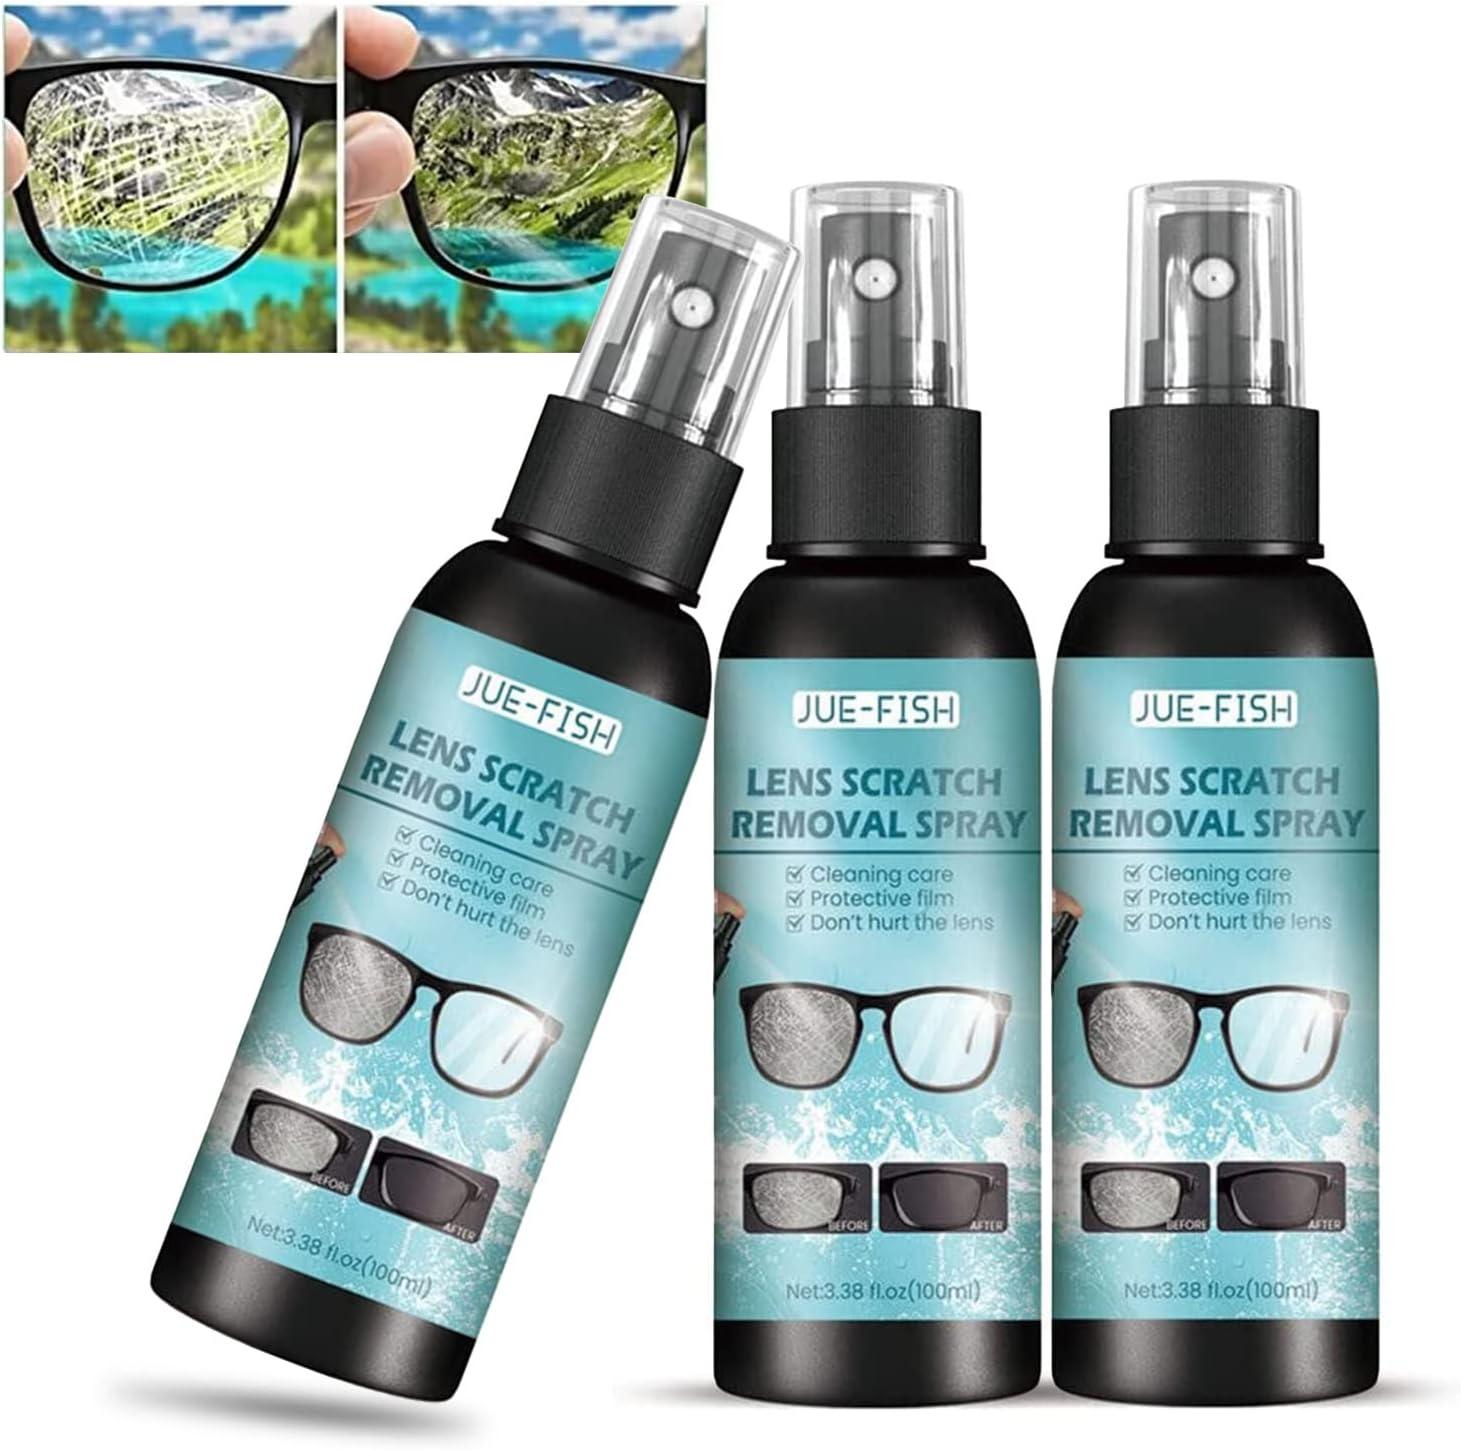 YOFOKO Lens Scratch Removal Spray, Mirror Scratch Remover, Eyeglass  Windshield Glass Repair Liquid, Lens Clearing Spray, Sunglasses and  Eyeglass Lens